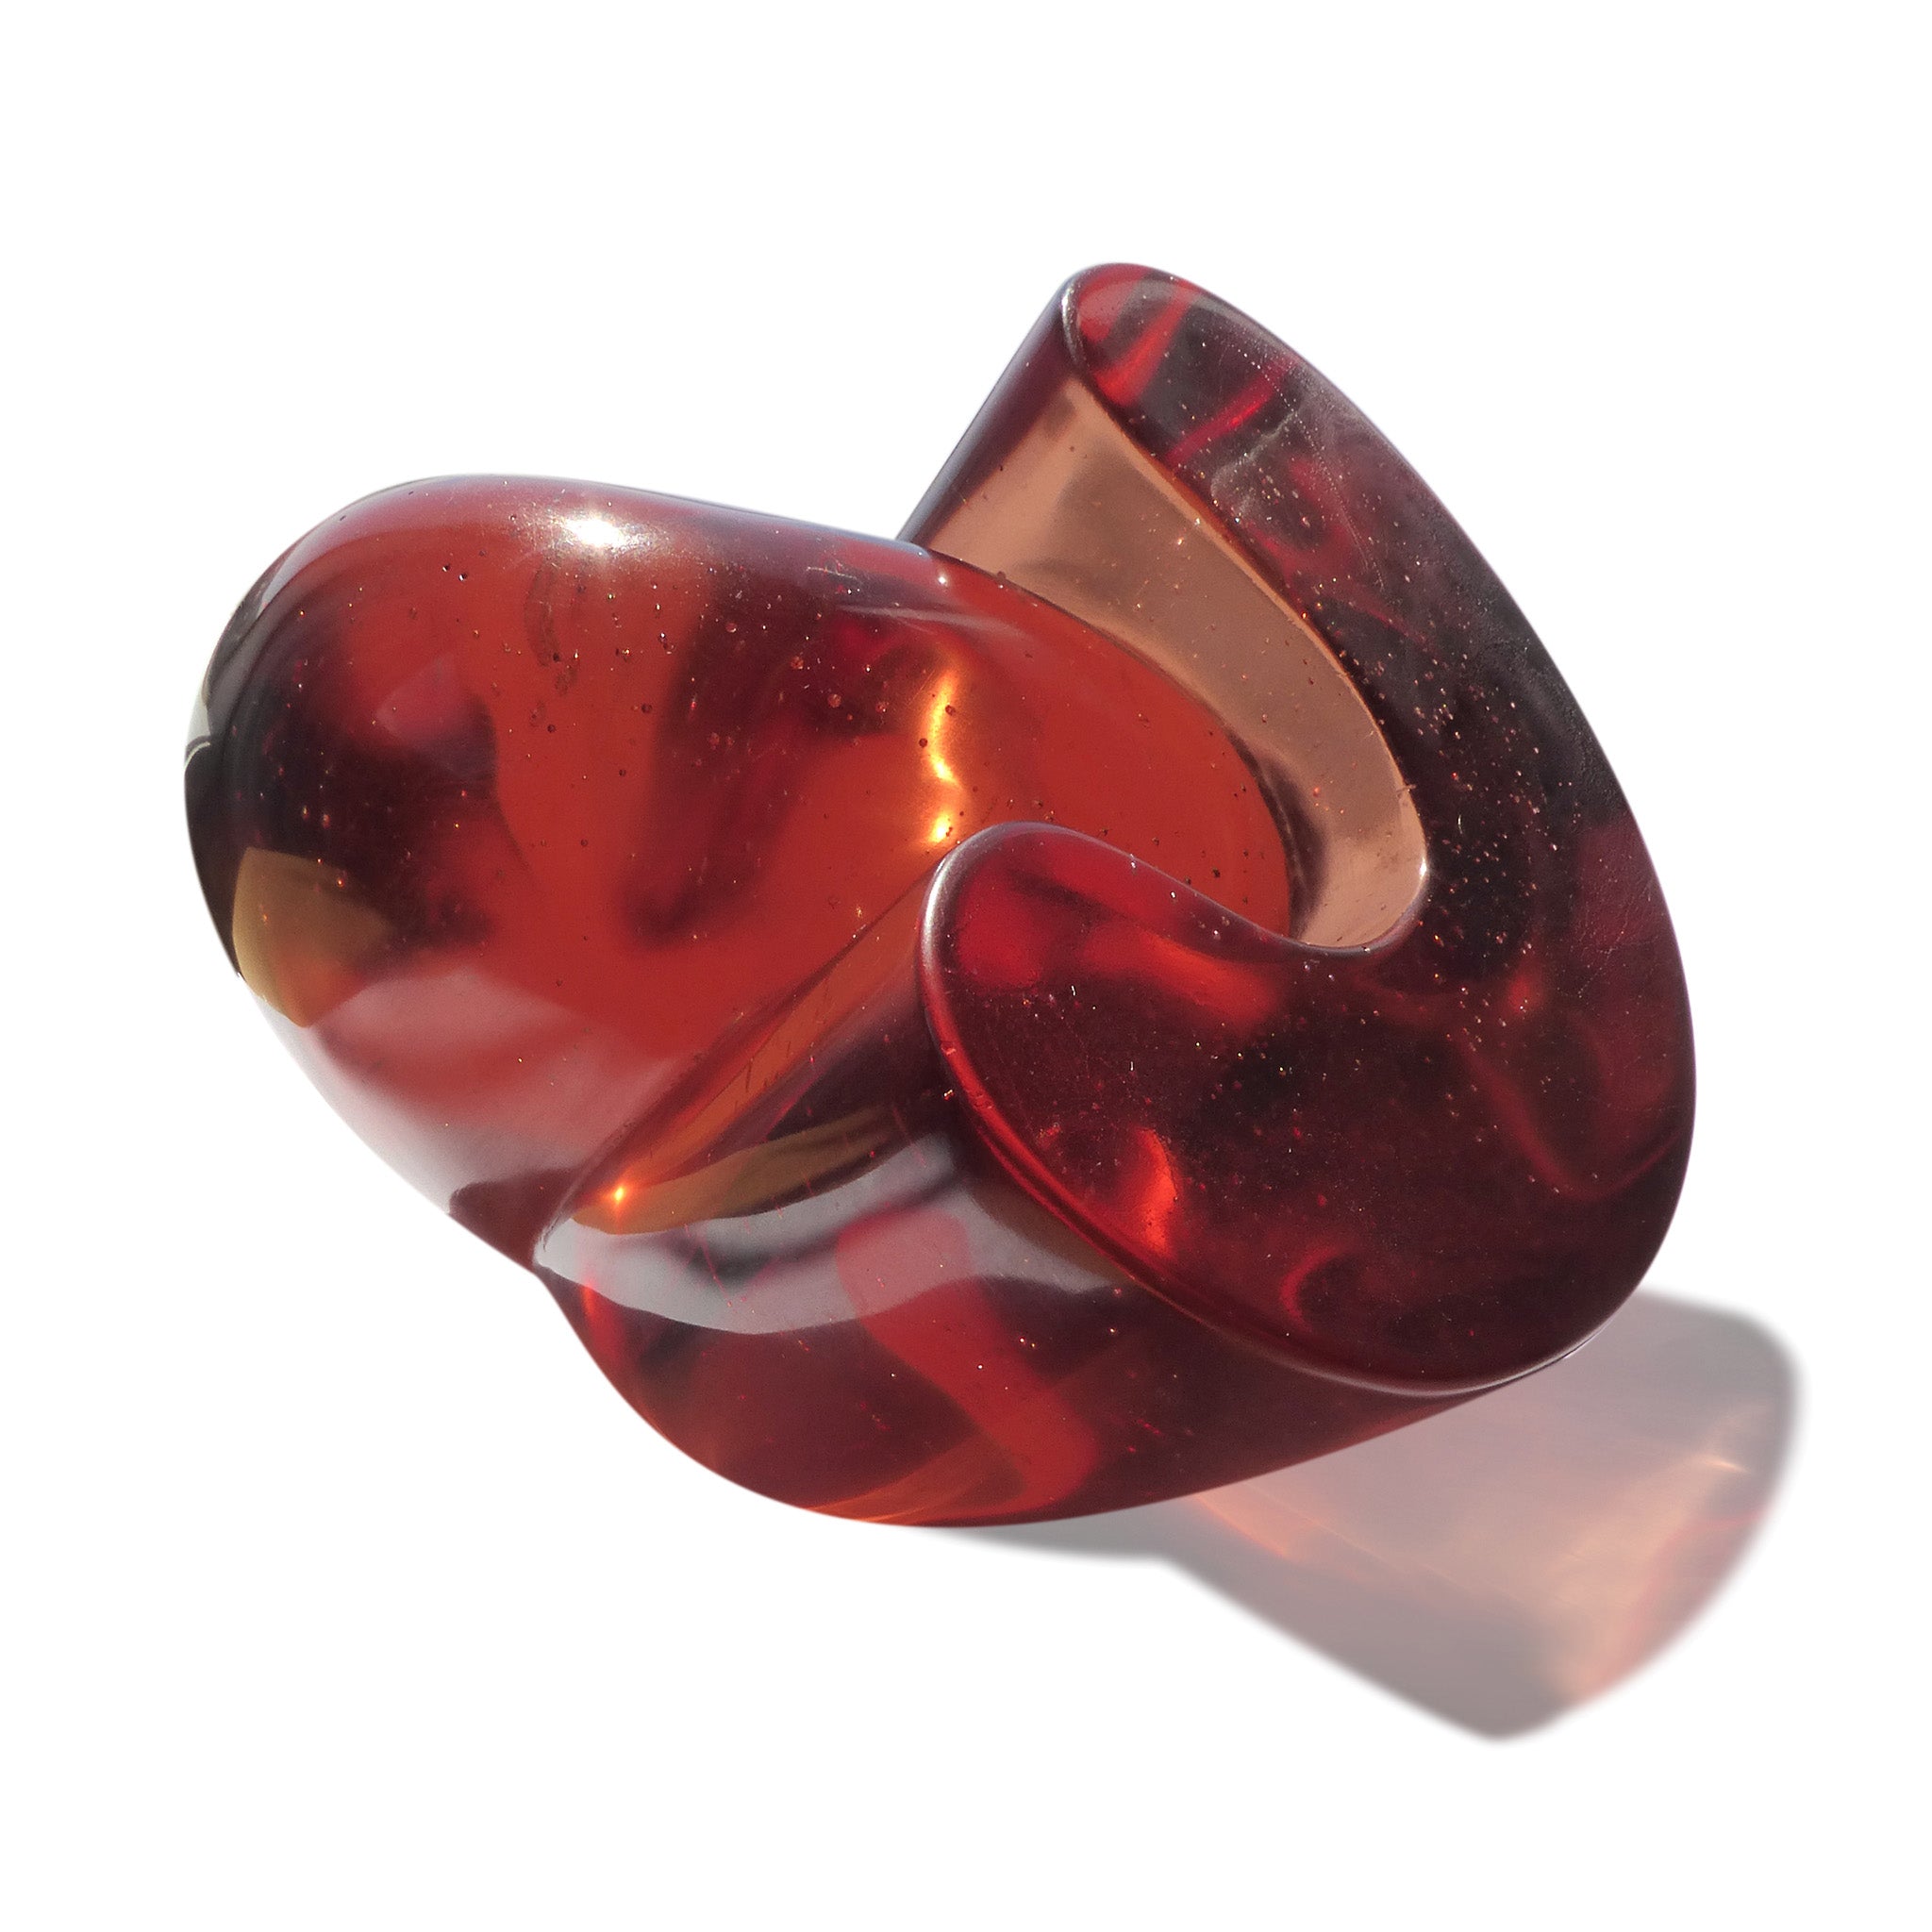 Abstract polished cast glass sculpture of red blood cells by Stephen Williams | New Zealand.